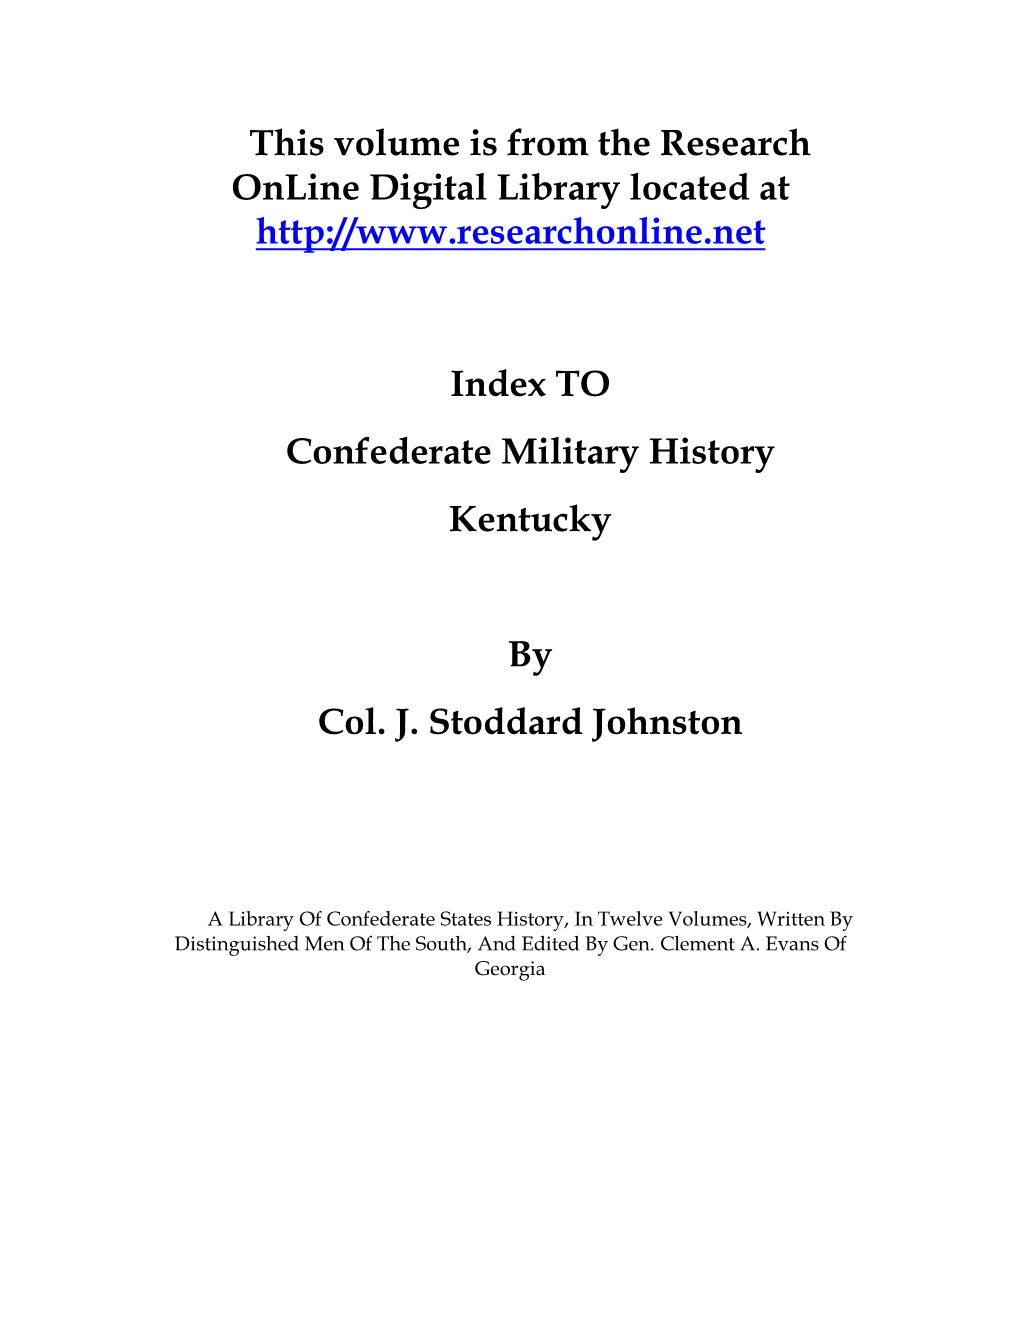 This Volume Is from the Research Online Digital Library Located At